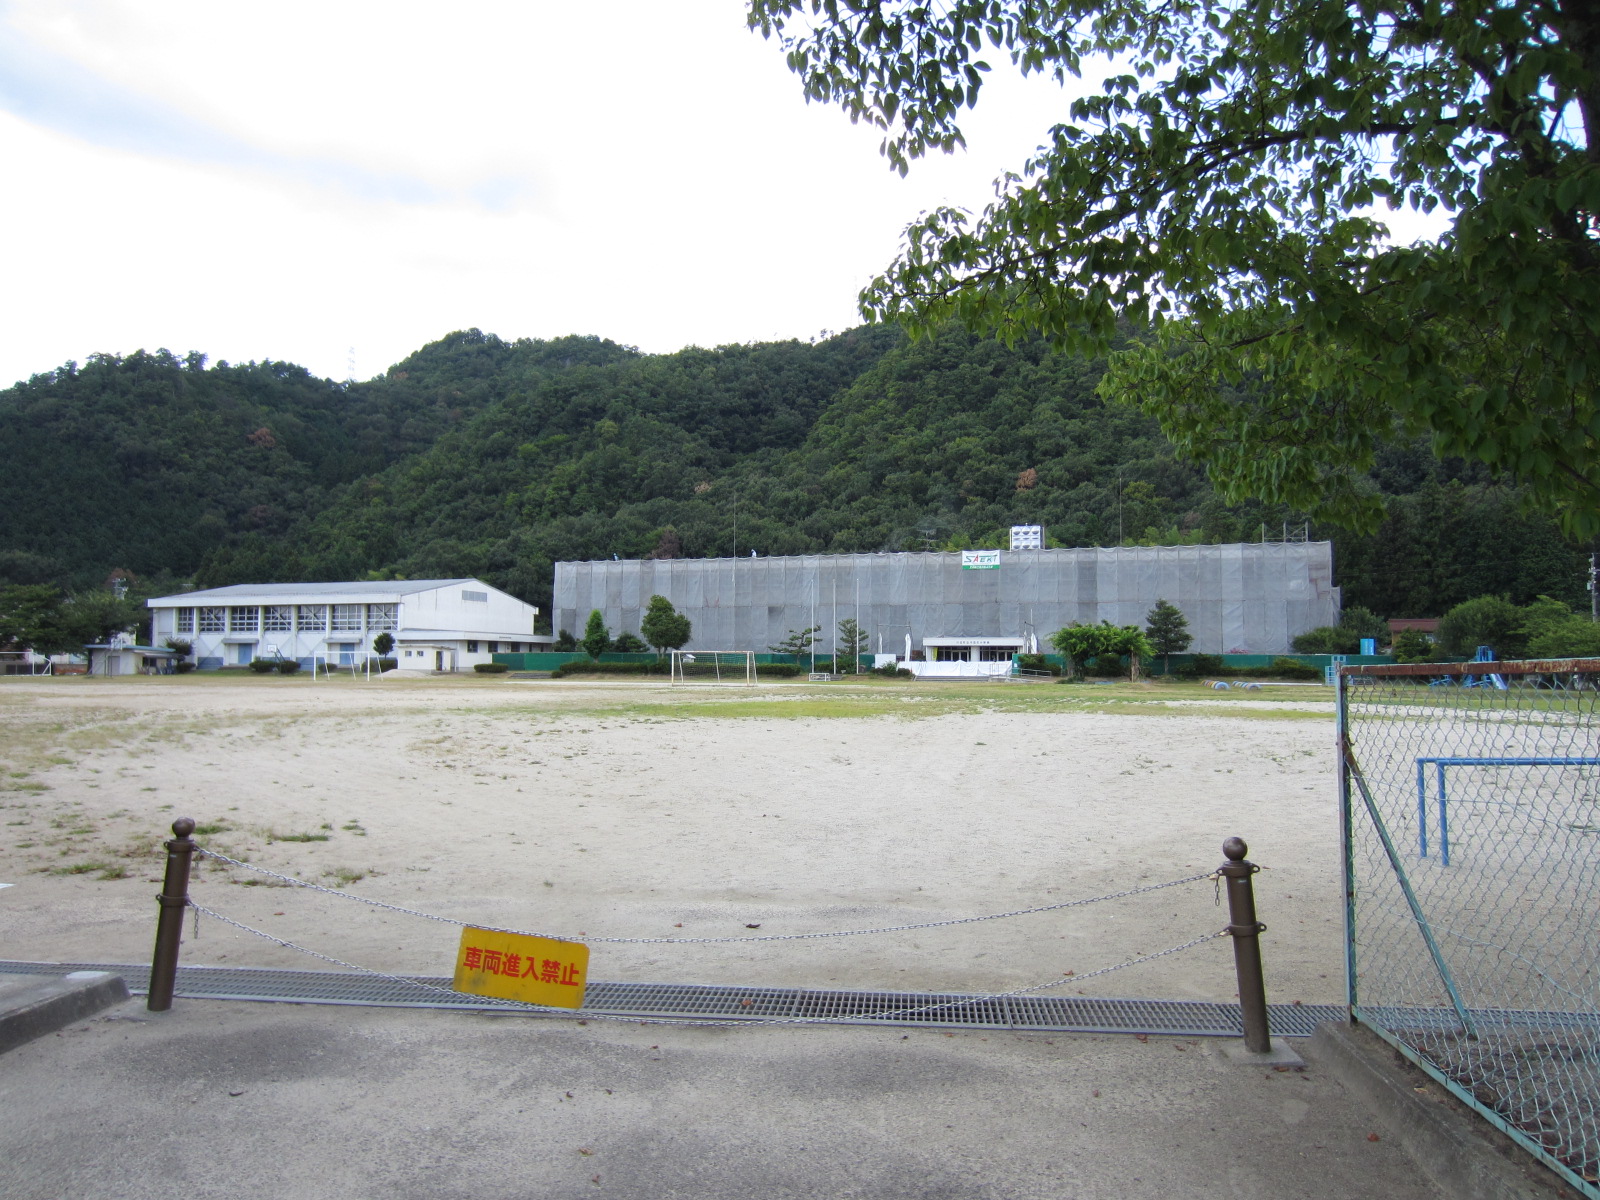 Primary school. 2279m to the riverside-cho, Tachikawa Henkita elementary school (elementary school)